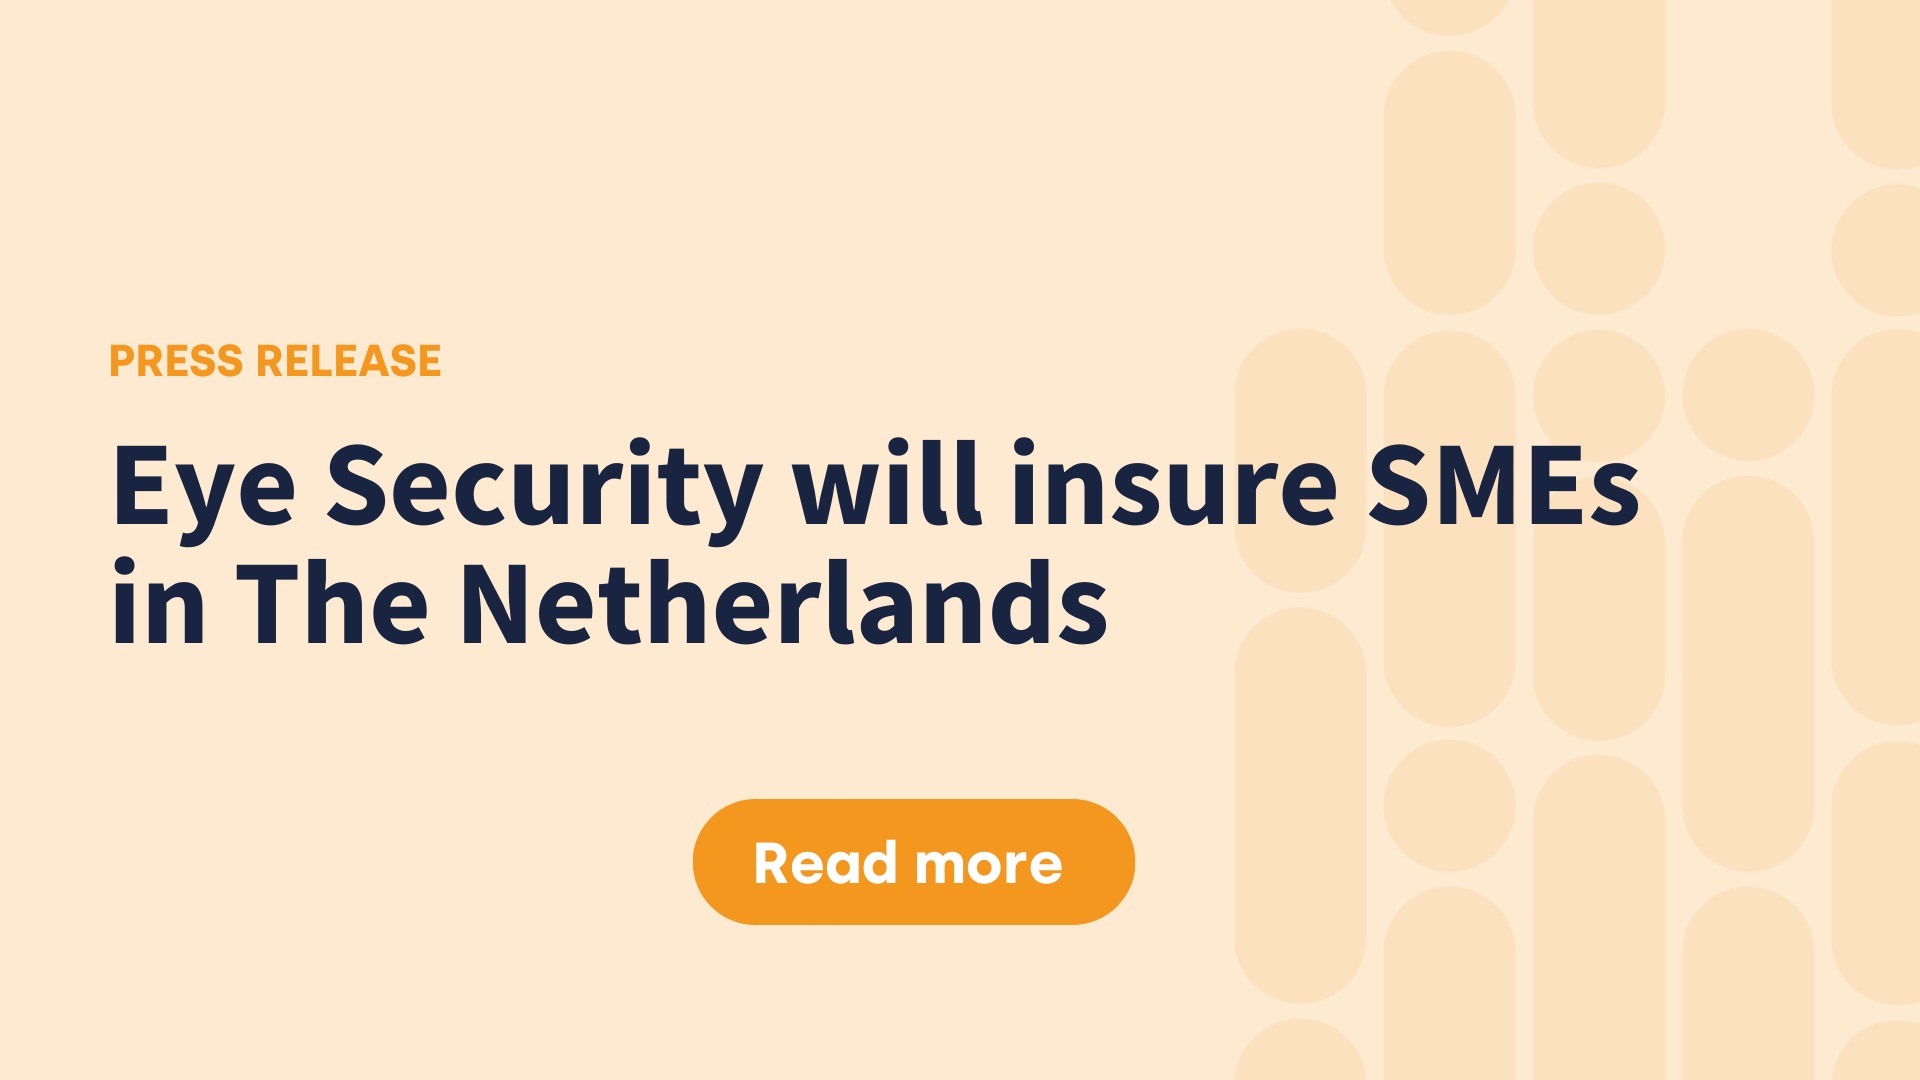 Eye Security launches insurance solution for SMEs